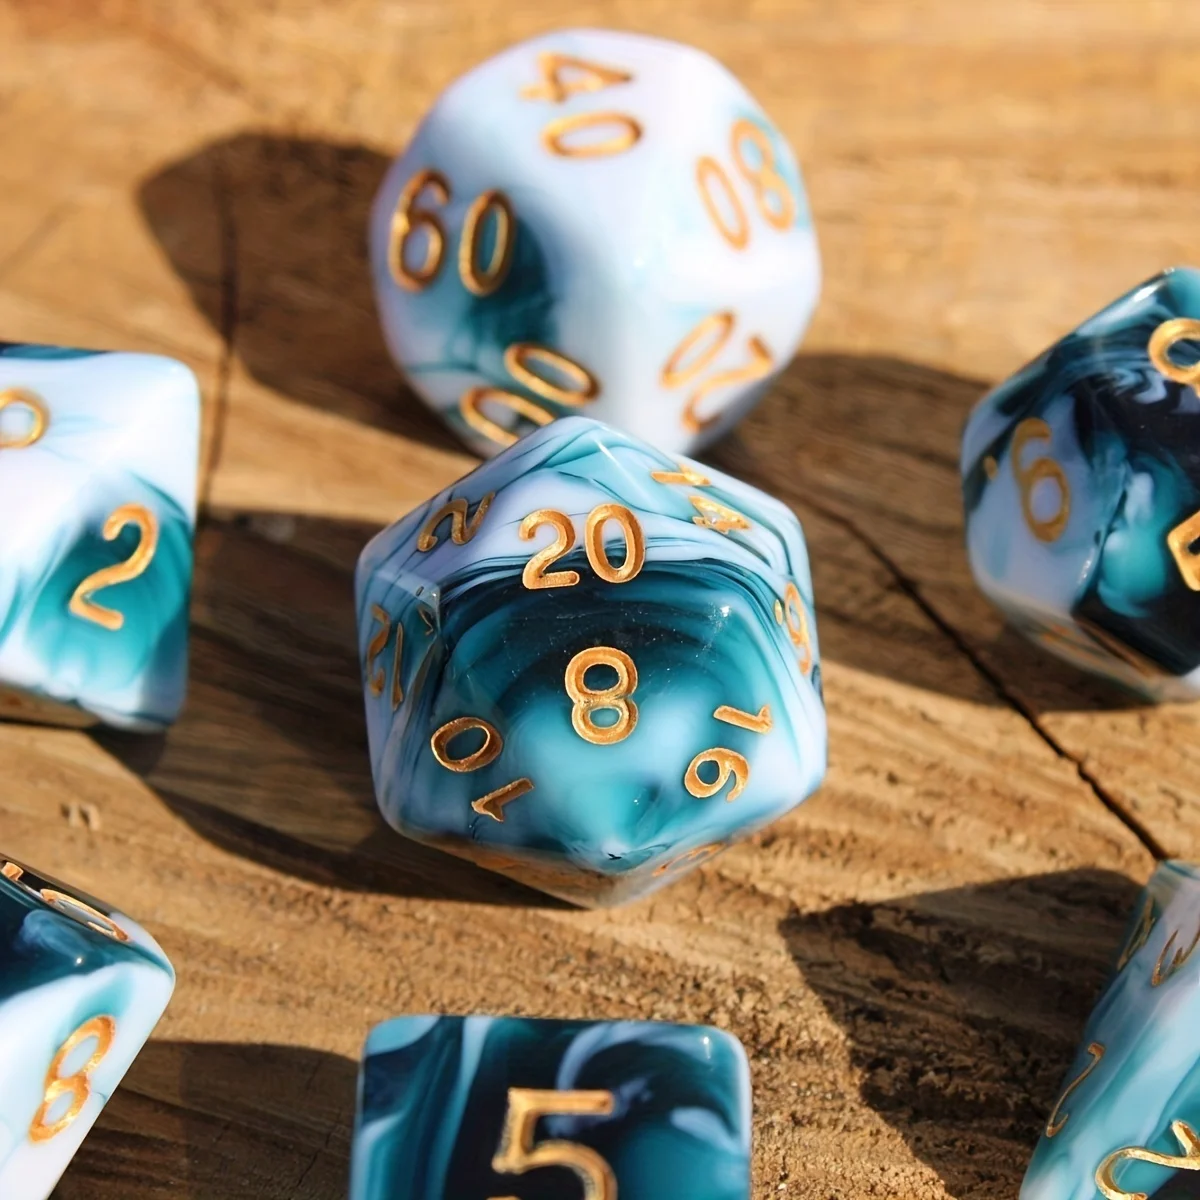 7Pcs/Set Blueberry Marble Dice for DND Dungeons and Dragons Table Games D&D RPG Tabletop Roleplaying 7pcs set blueberry marble dice for dnd dungeons and dragons table games d